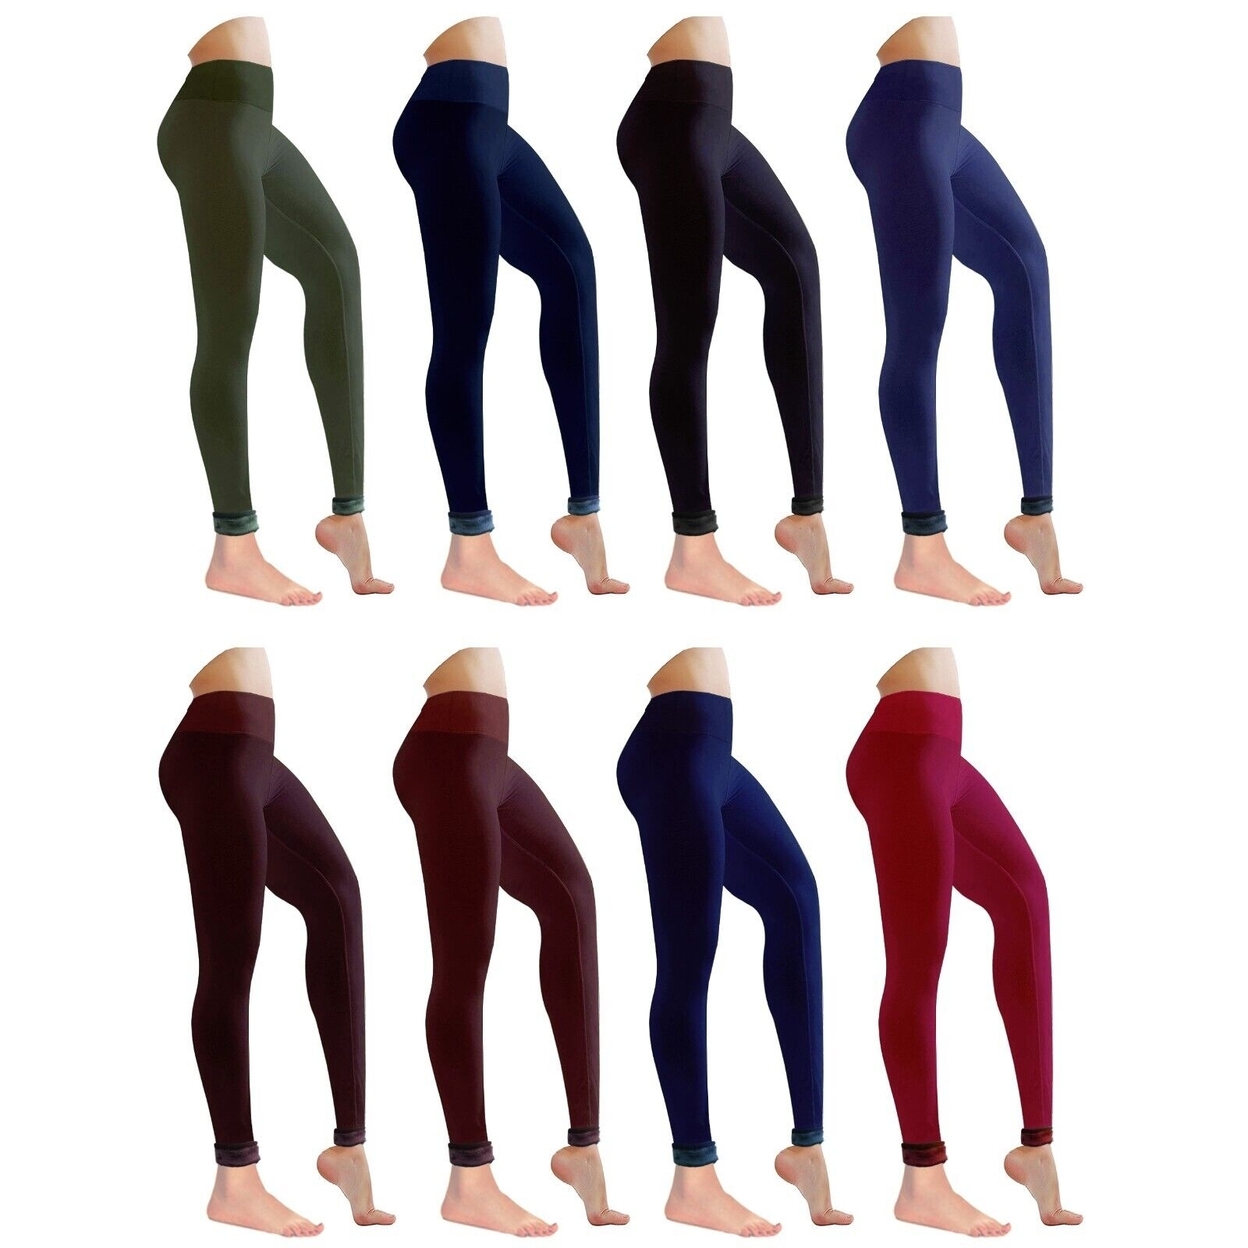 3-Pack: Women's Winter Warm Ultra Soft Cozy Fur Lined Leggings - Assorted, Xx-large